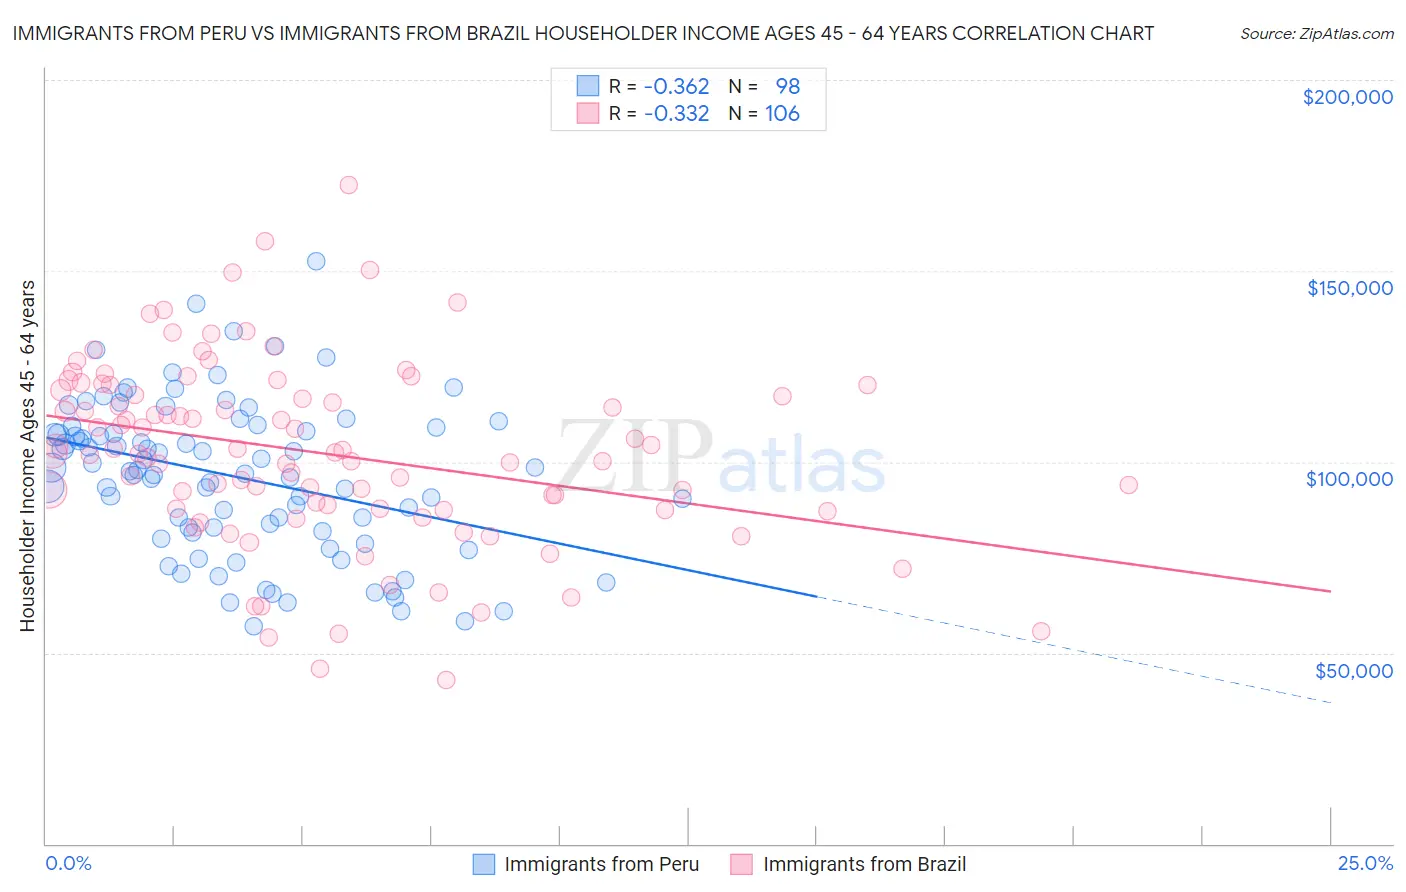 Immigrants from Peru vs Immigrants from Brazil Householder Income Ages 45 - 64 years